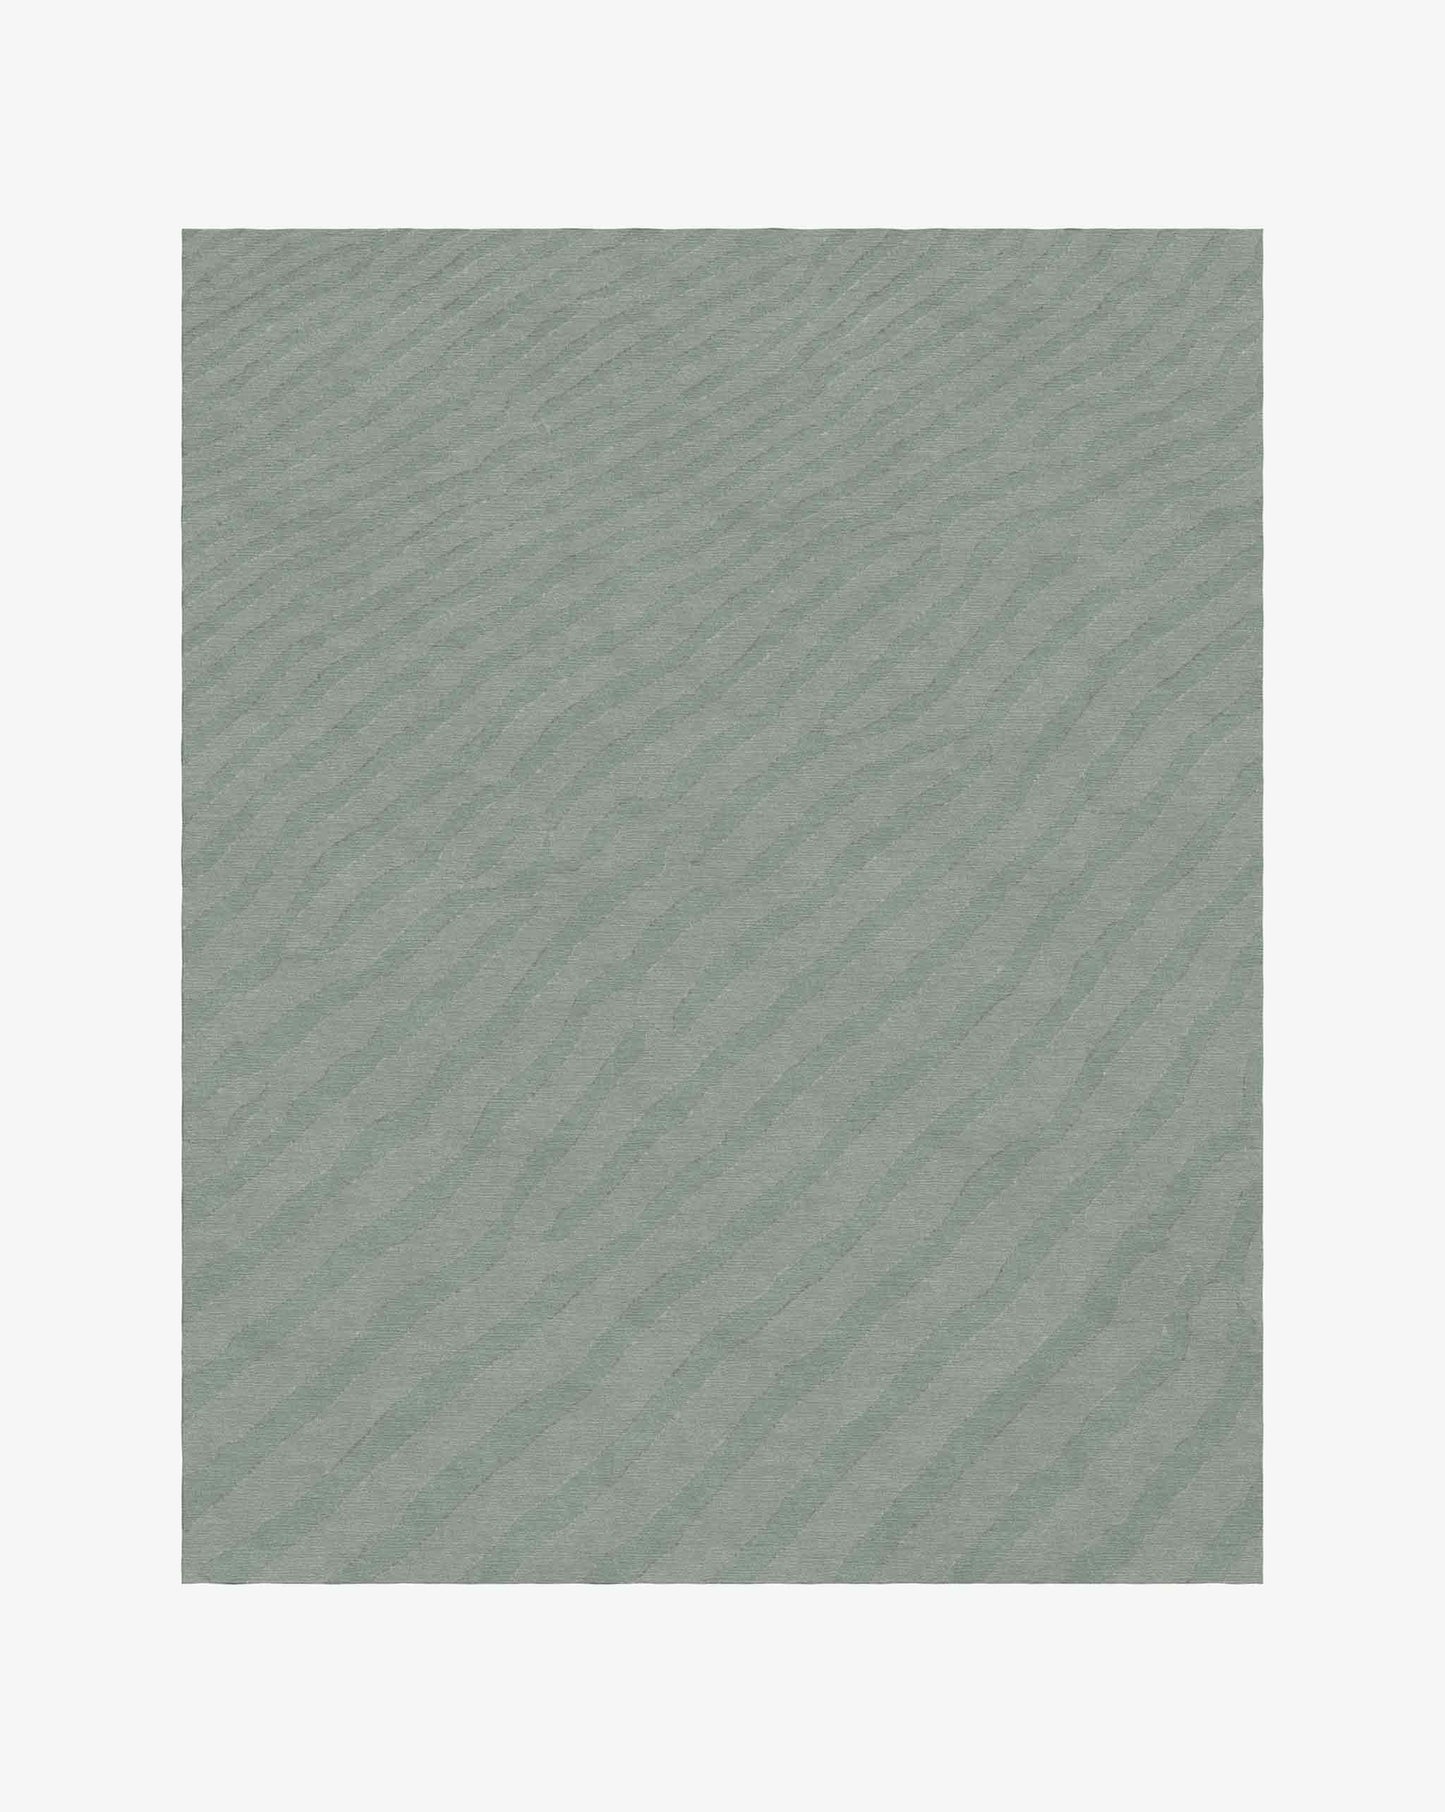 The Sand Lines rug in Sage incorporates two tones of green in soft merino wool.